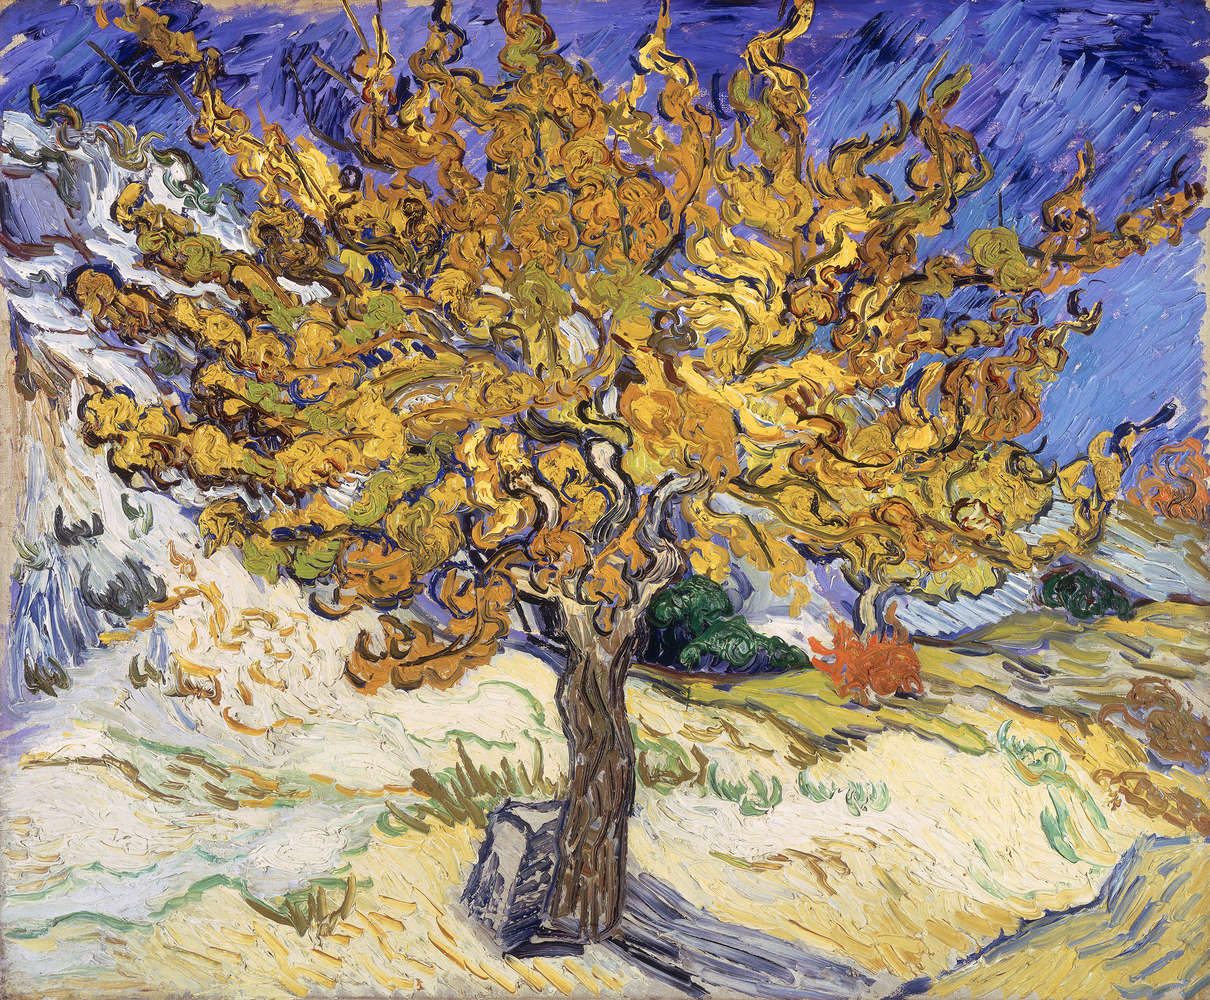             Photo wallpaper "Mulberry tree" by Vincent van Gogh
        